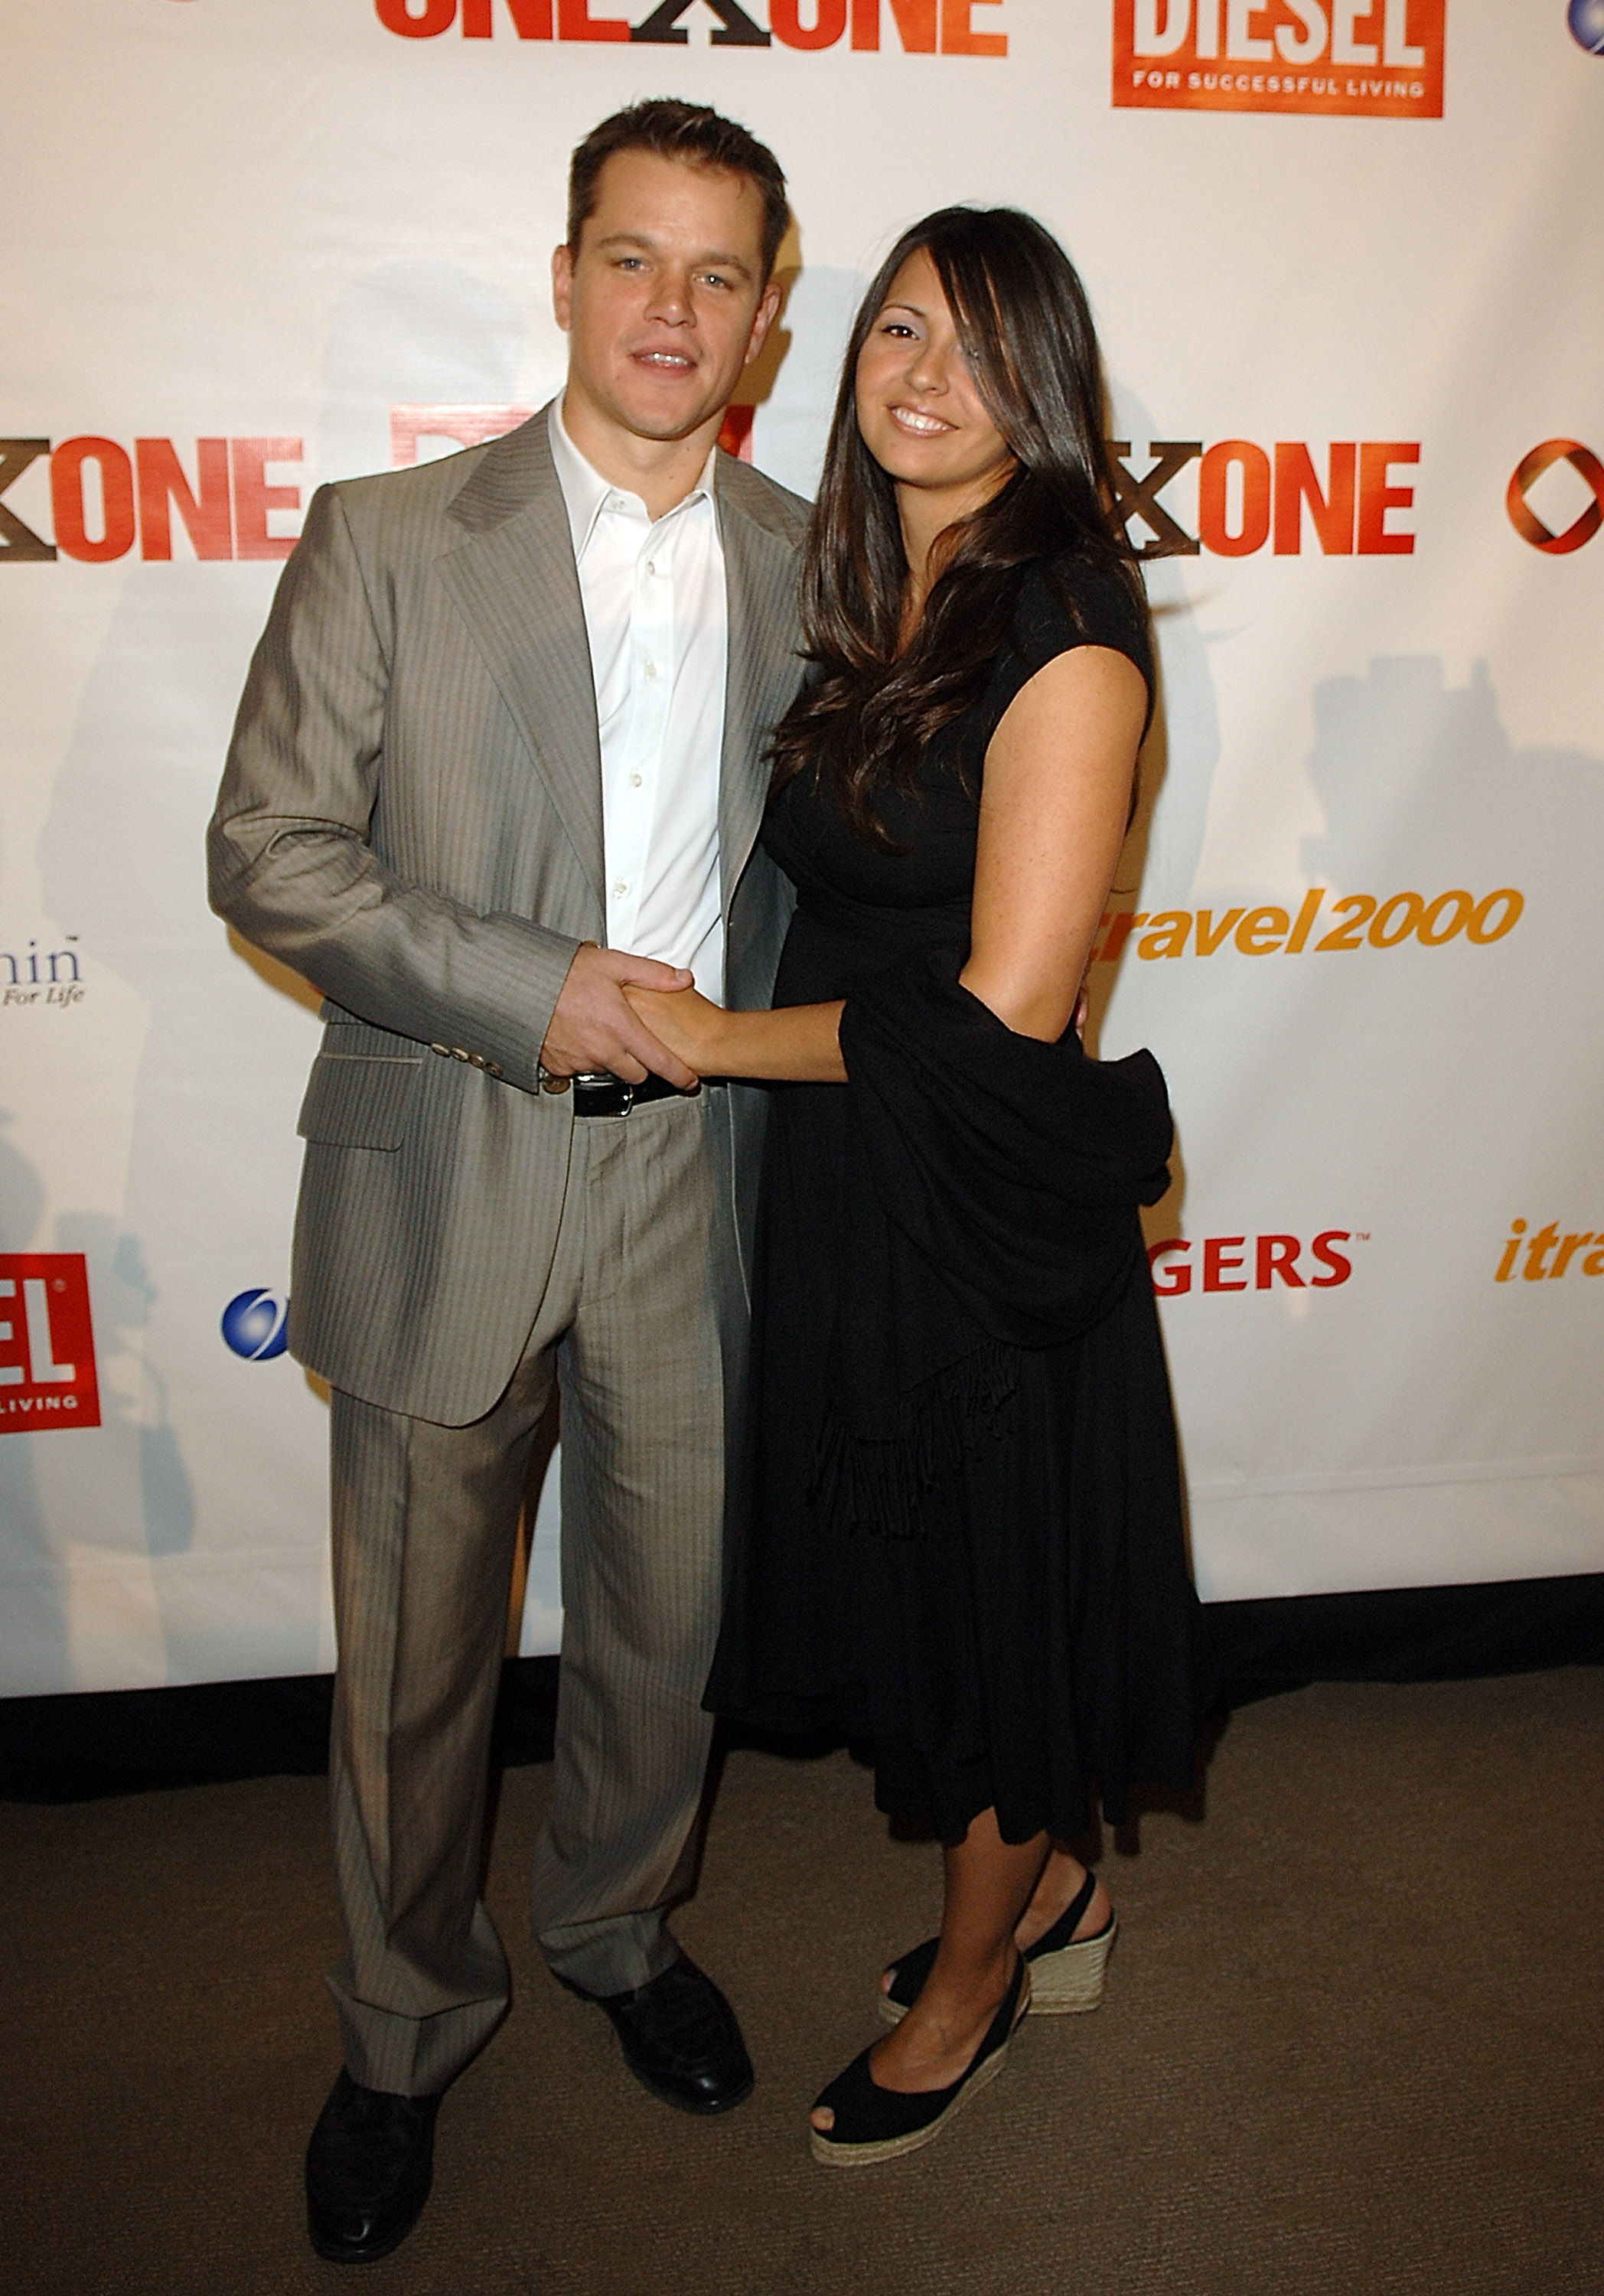 Matt Damon with his wife Luciana Damon in Toronto, Ontario, Canada. | Source: Getty Images